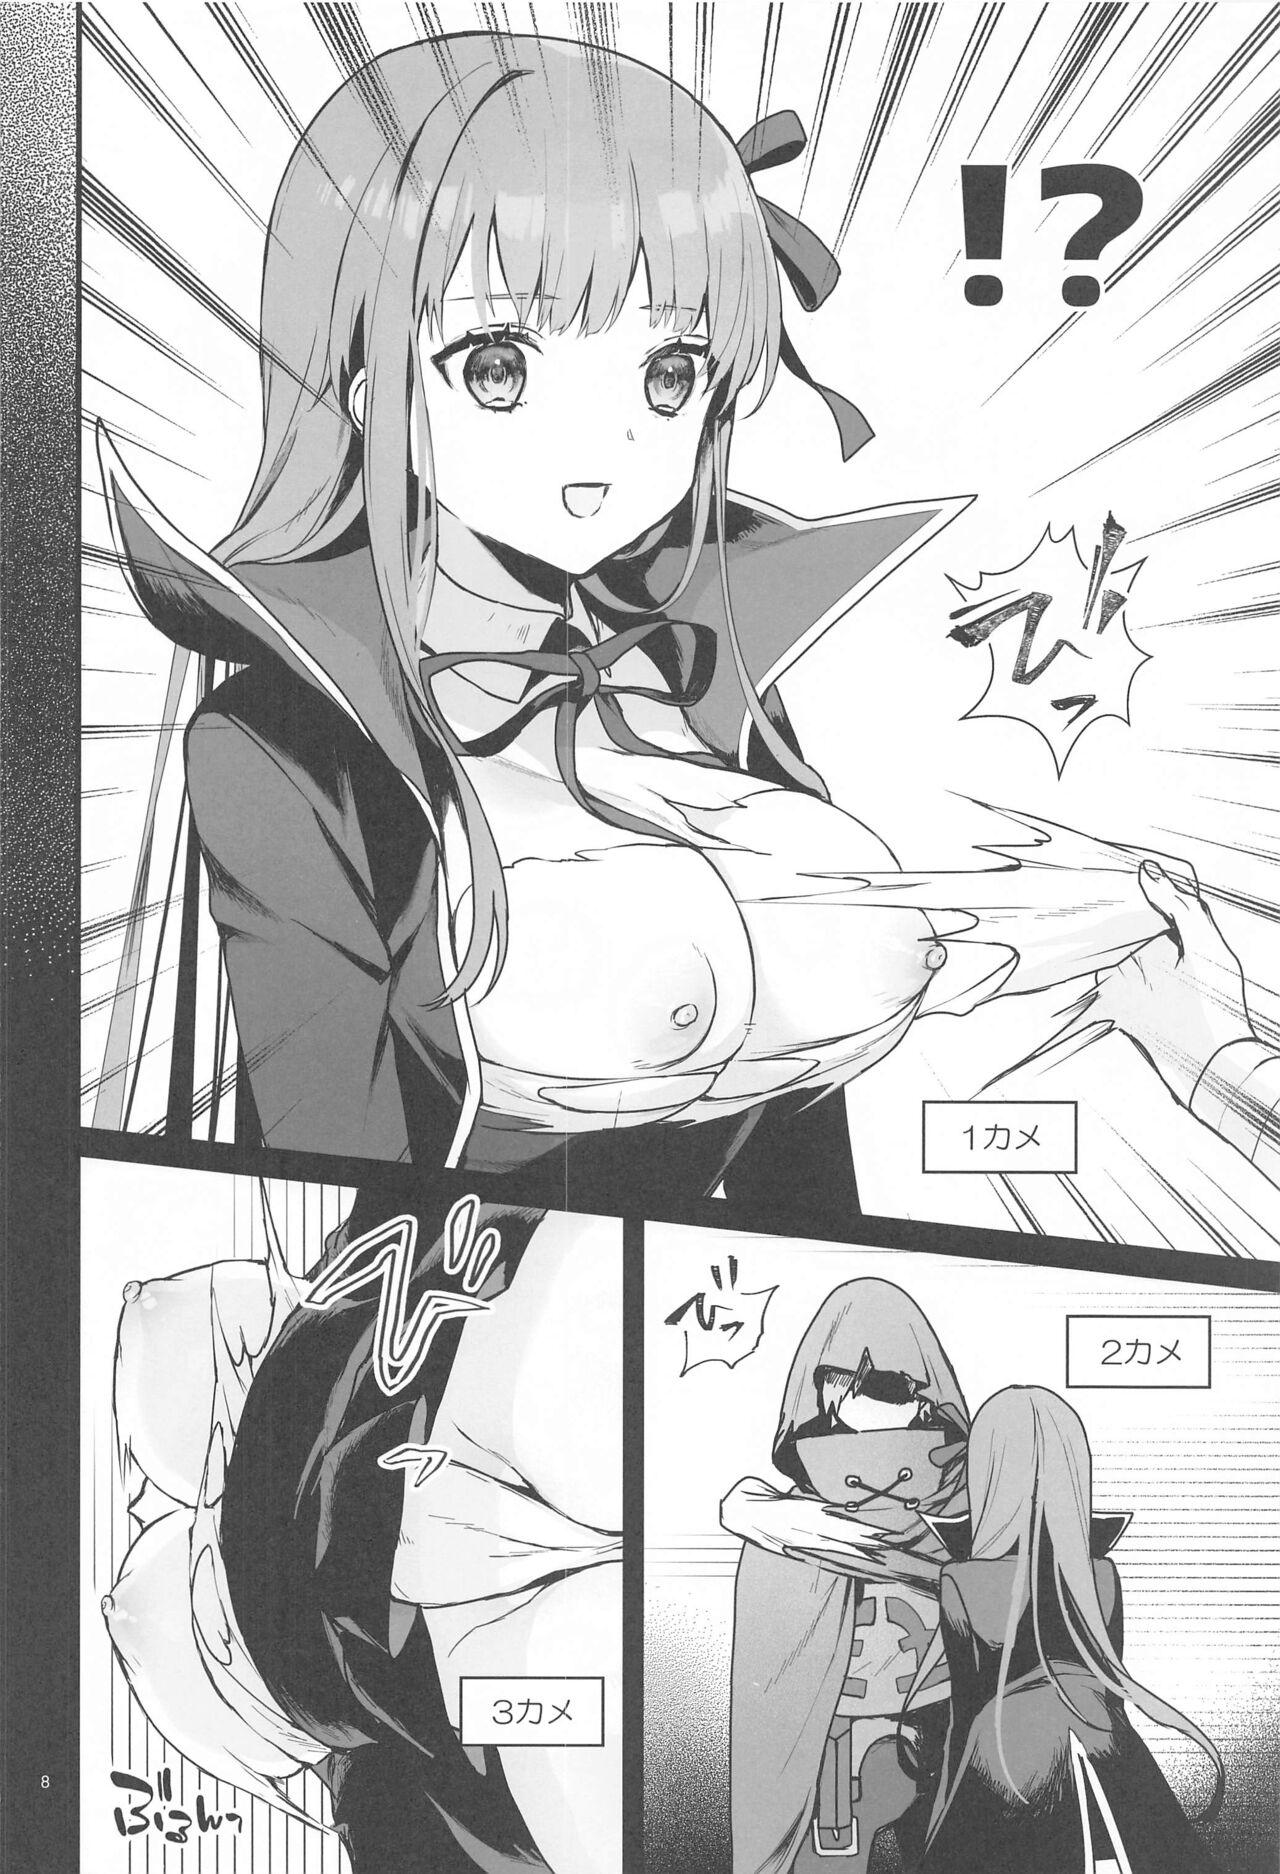 Porn Blow Jobs RoBBBBBBB - Fate grand order Brasil - Page 9